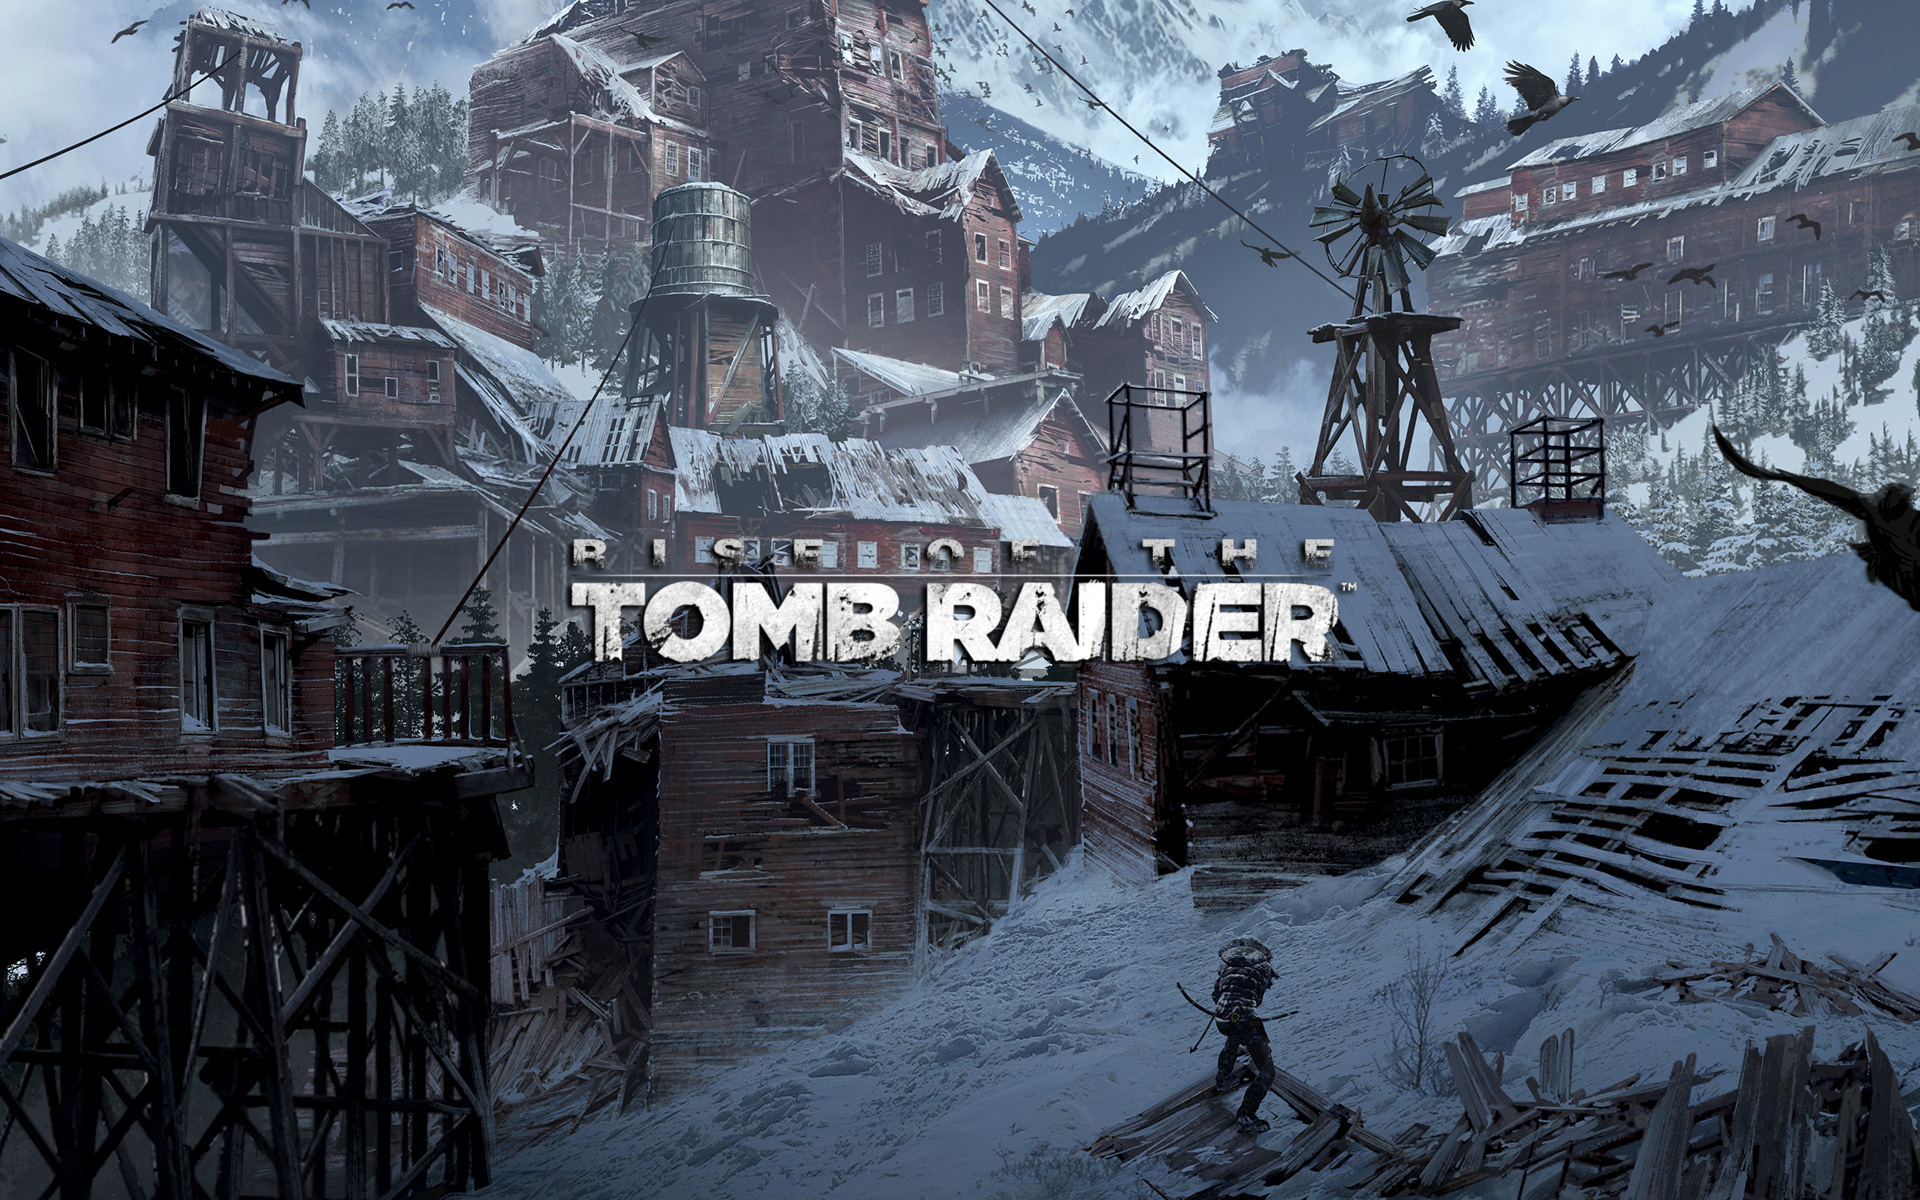 rise of the tomb raider village